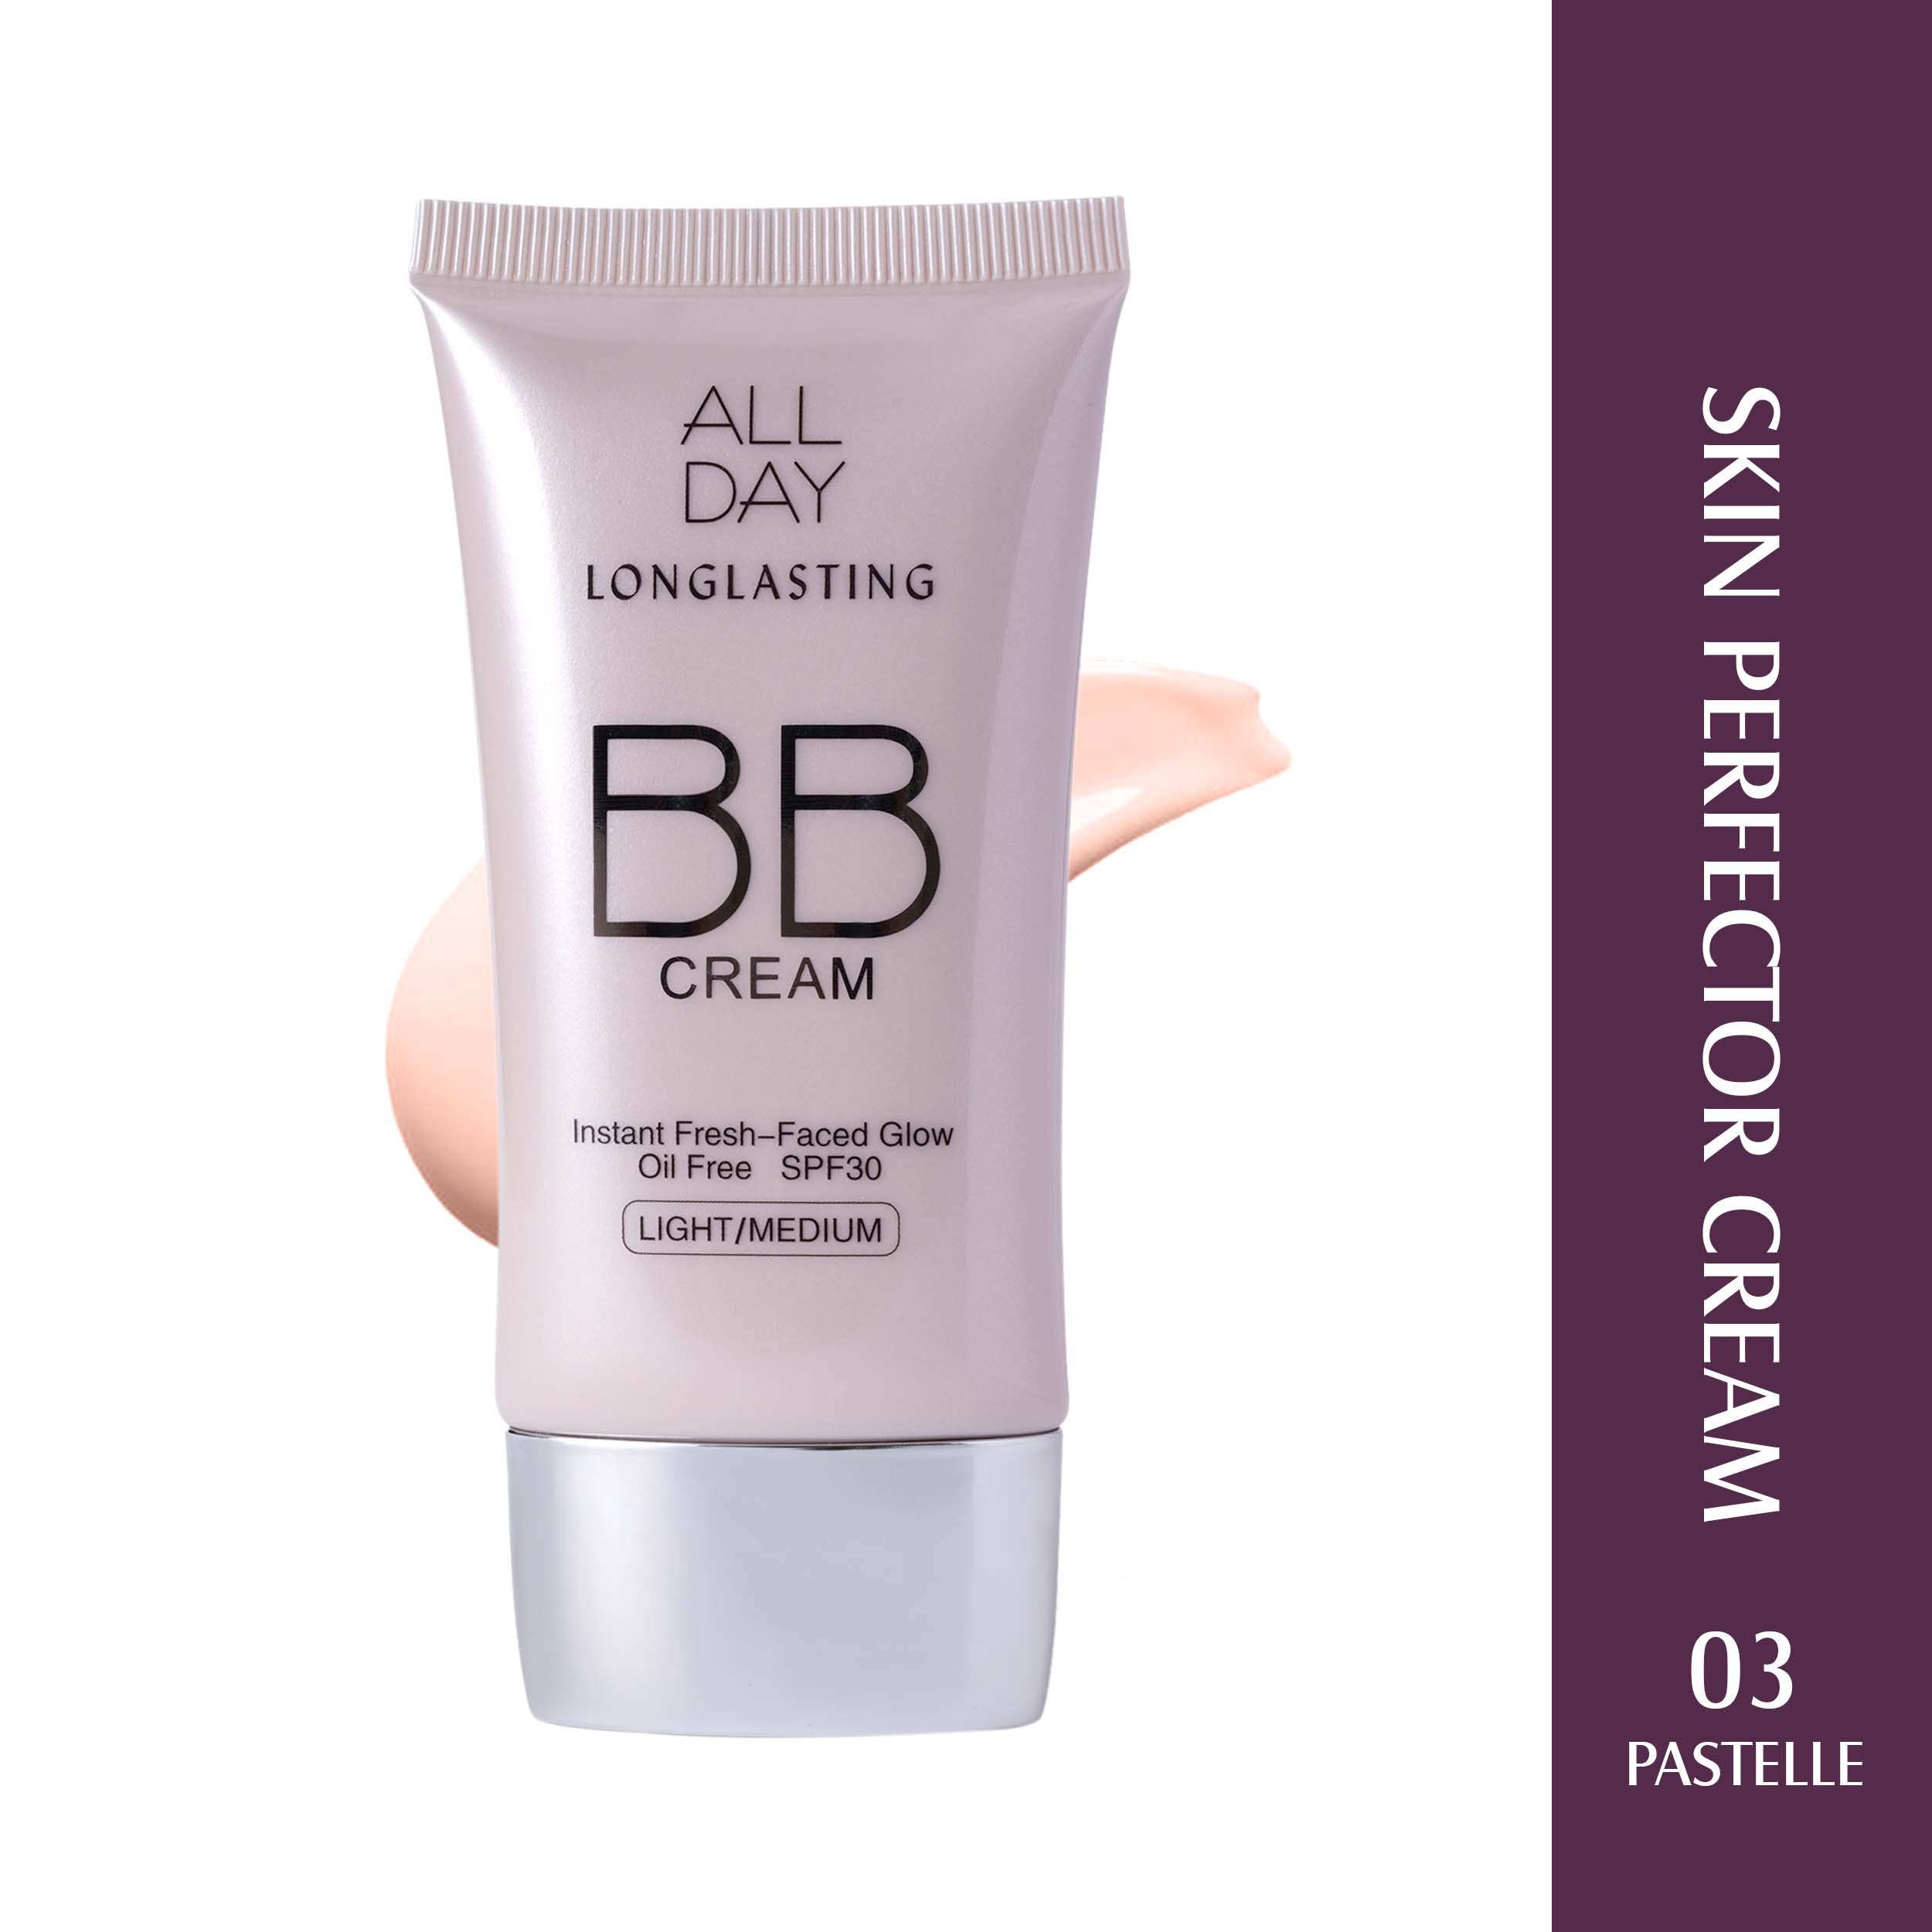 Glam21 BB Cream Instant Brightness Longlasting Coverage+SPF30| Lightweight Soft Texture Foundation, 40g (Shade-A03 PASTELLE)